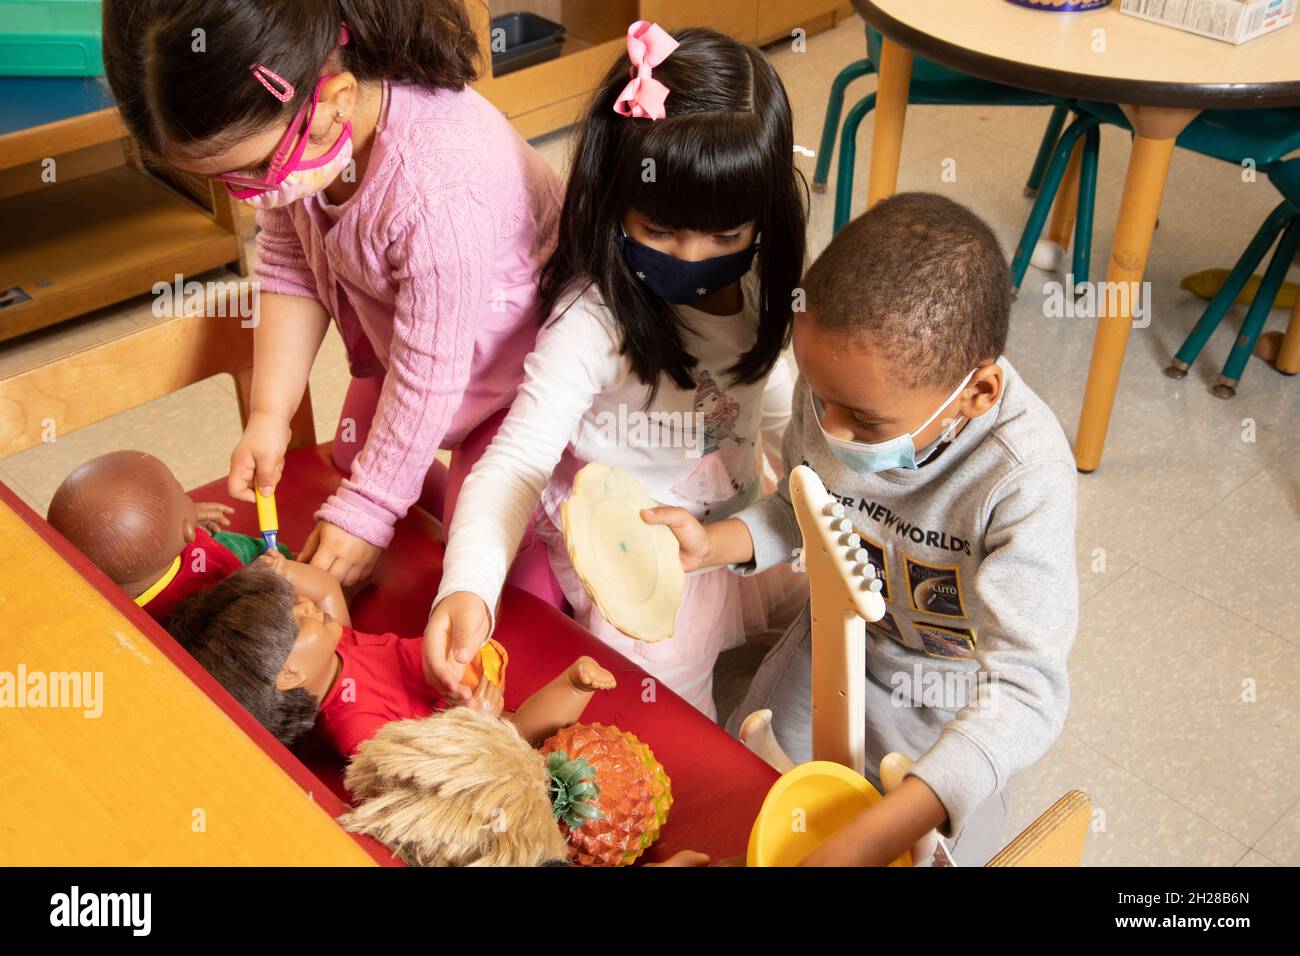 Education Preschool 3-4 year olds two girls and a boy playing with dolls and toy food in family area, wearing face masks to protect against Covid-19 Stock Photo